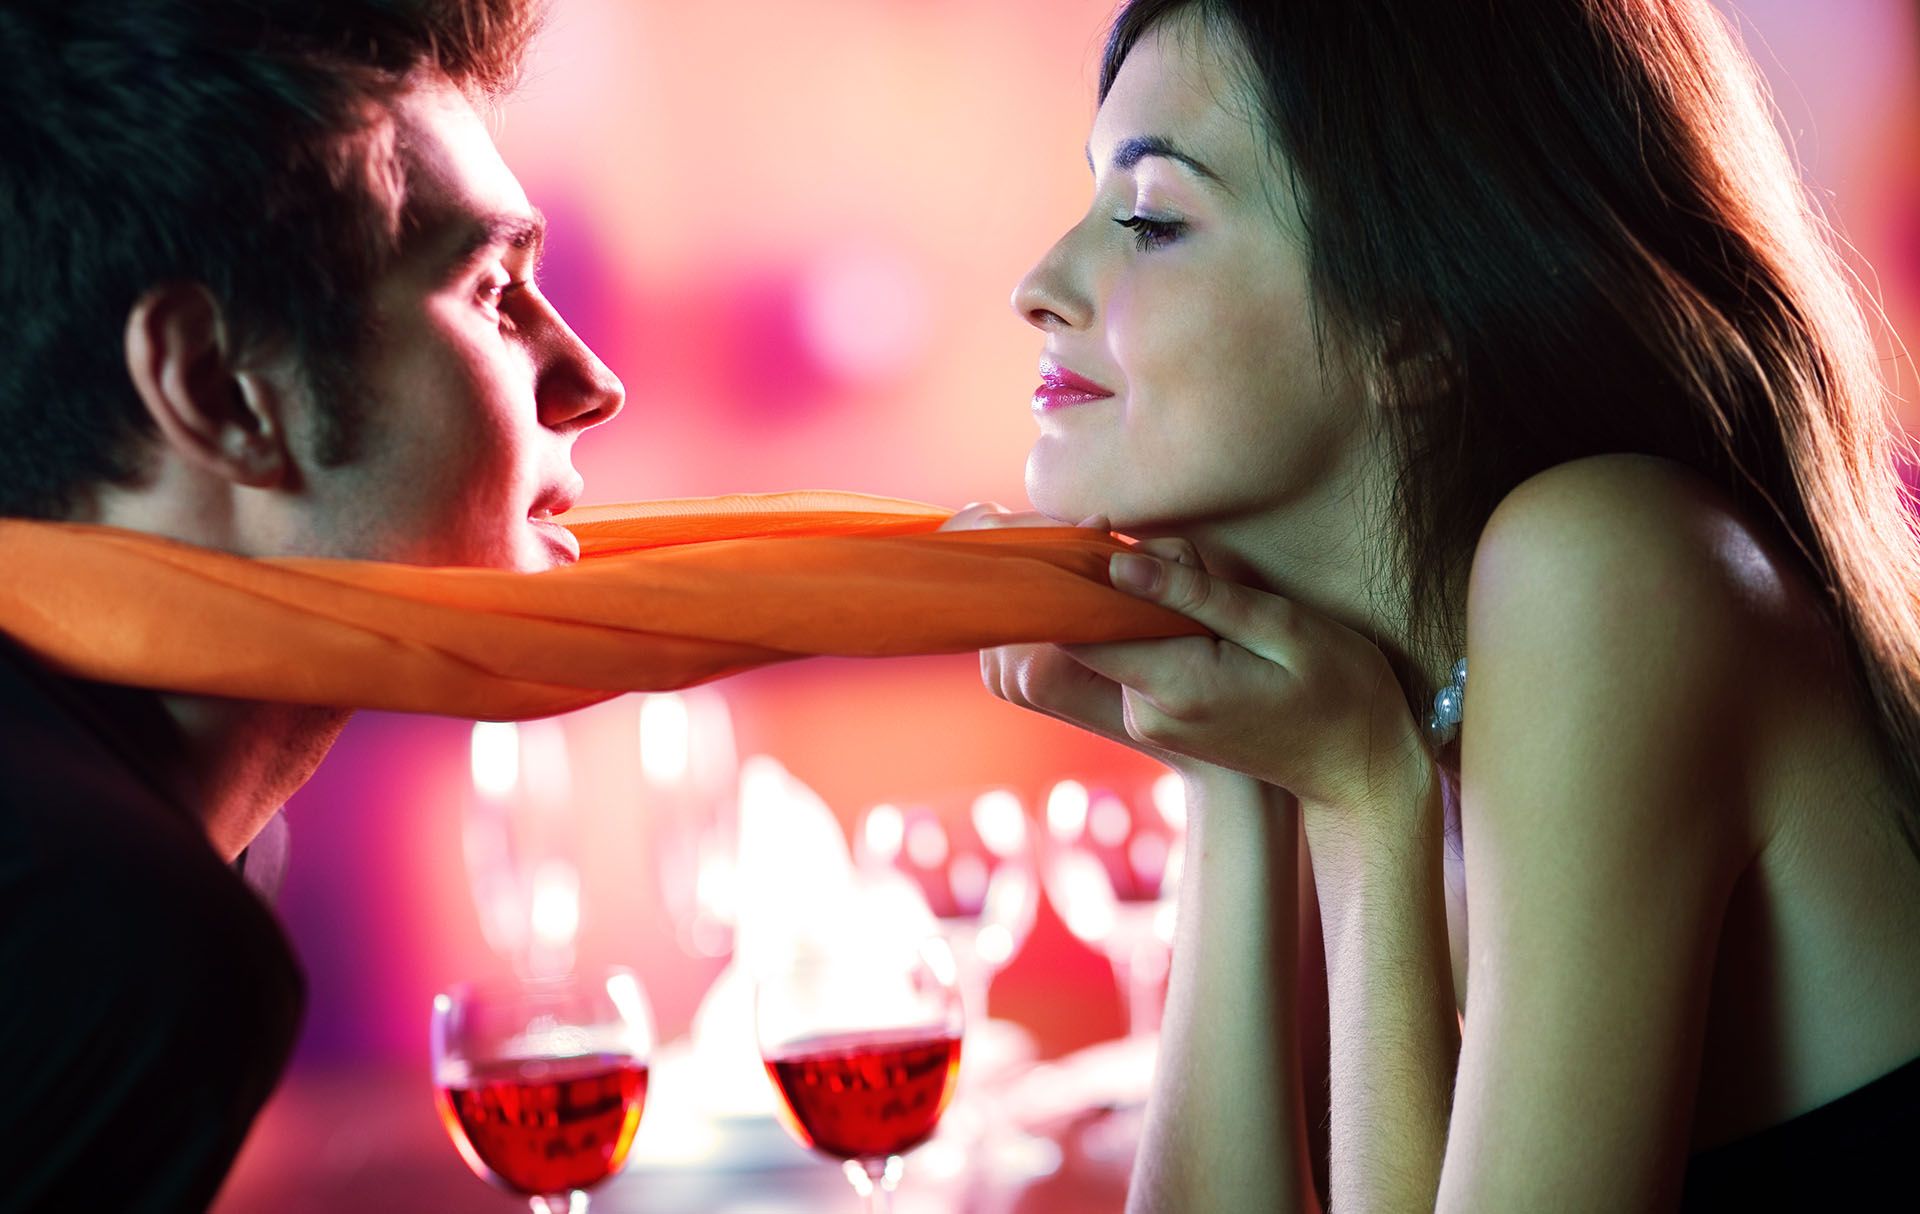 Young attractive happy couple kissing in restaurant, celebrating or on romantic date